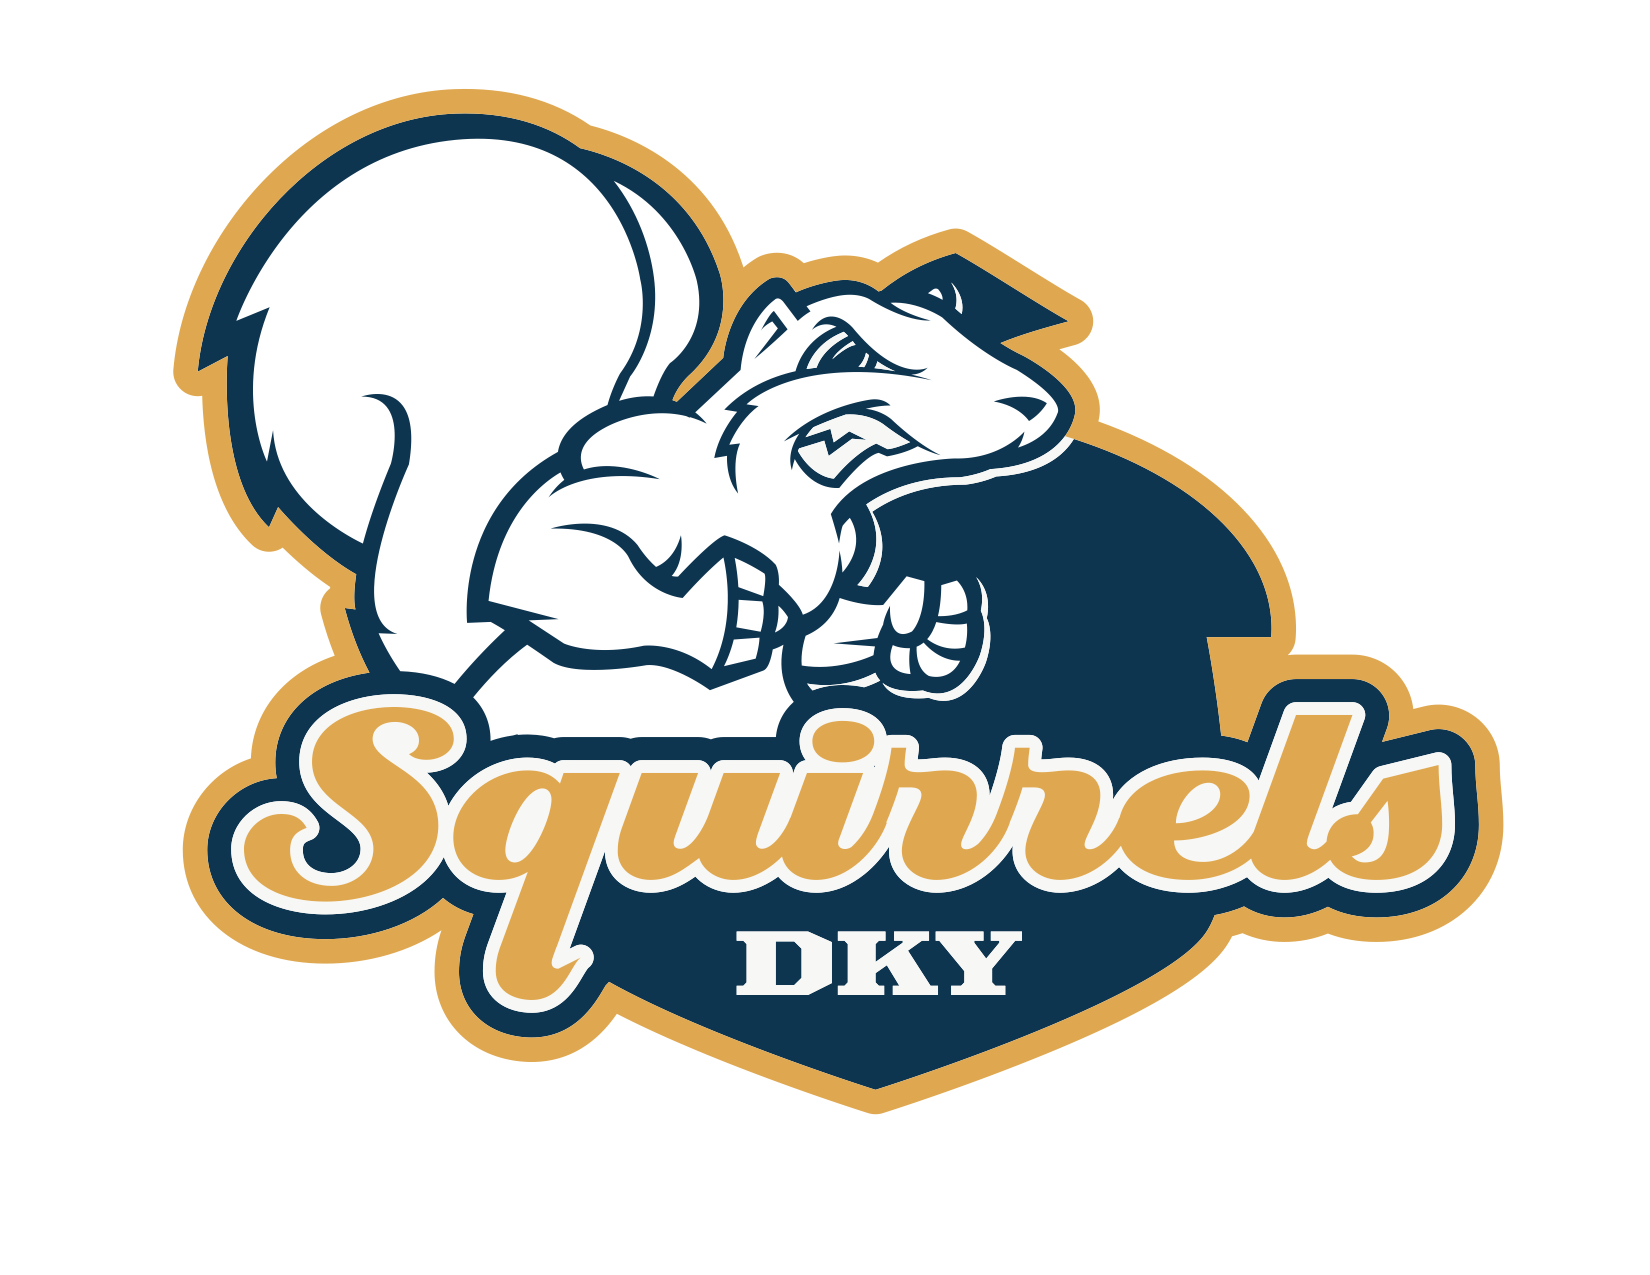 What’s the Story with the DKY Squirrel?